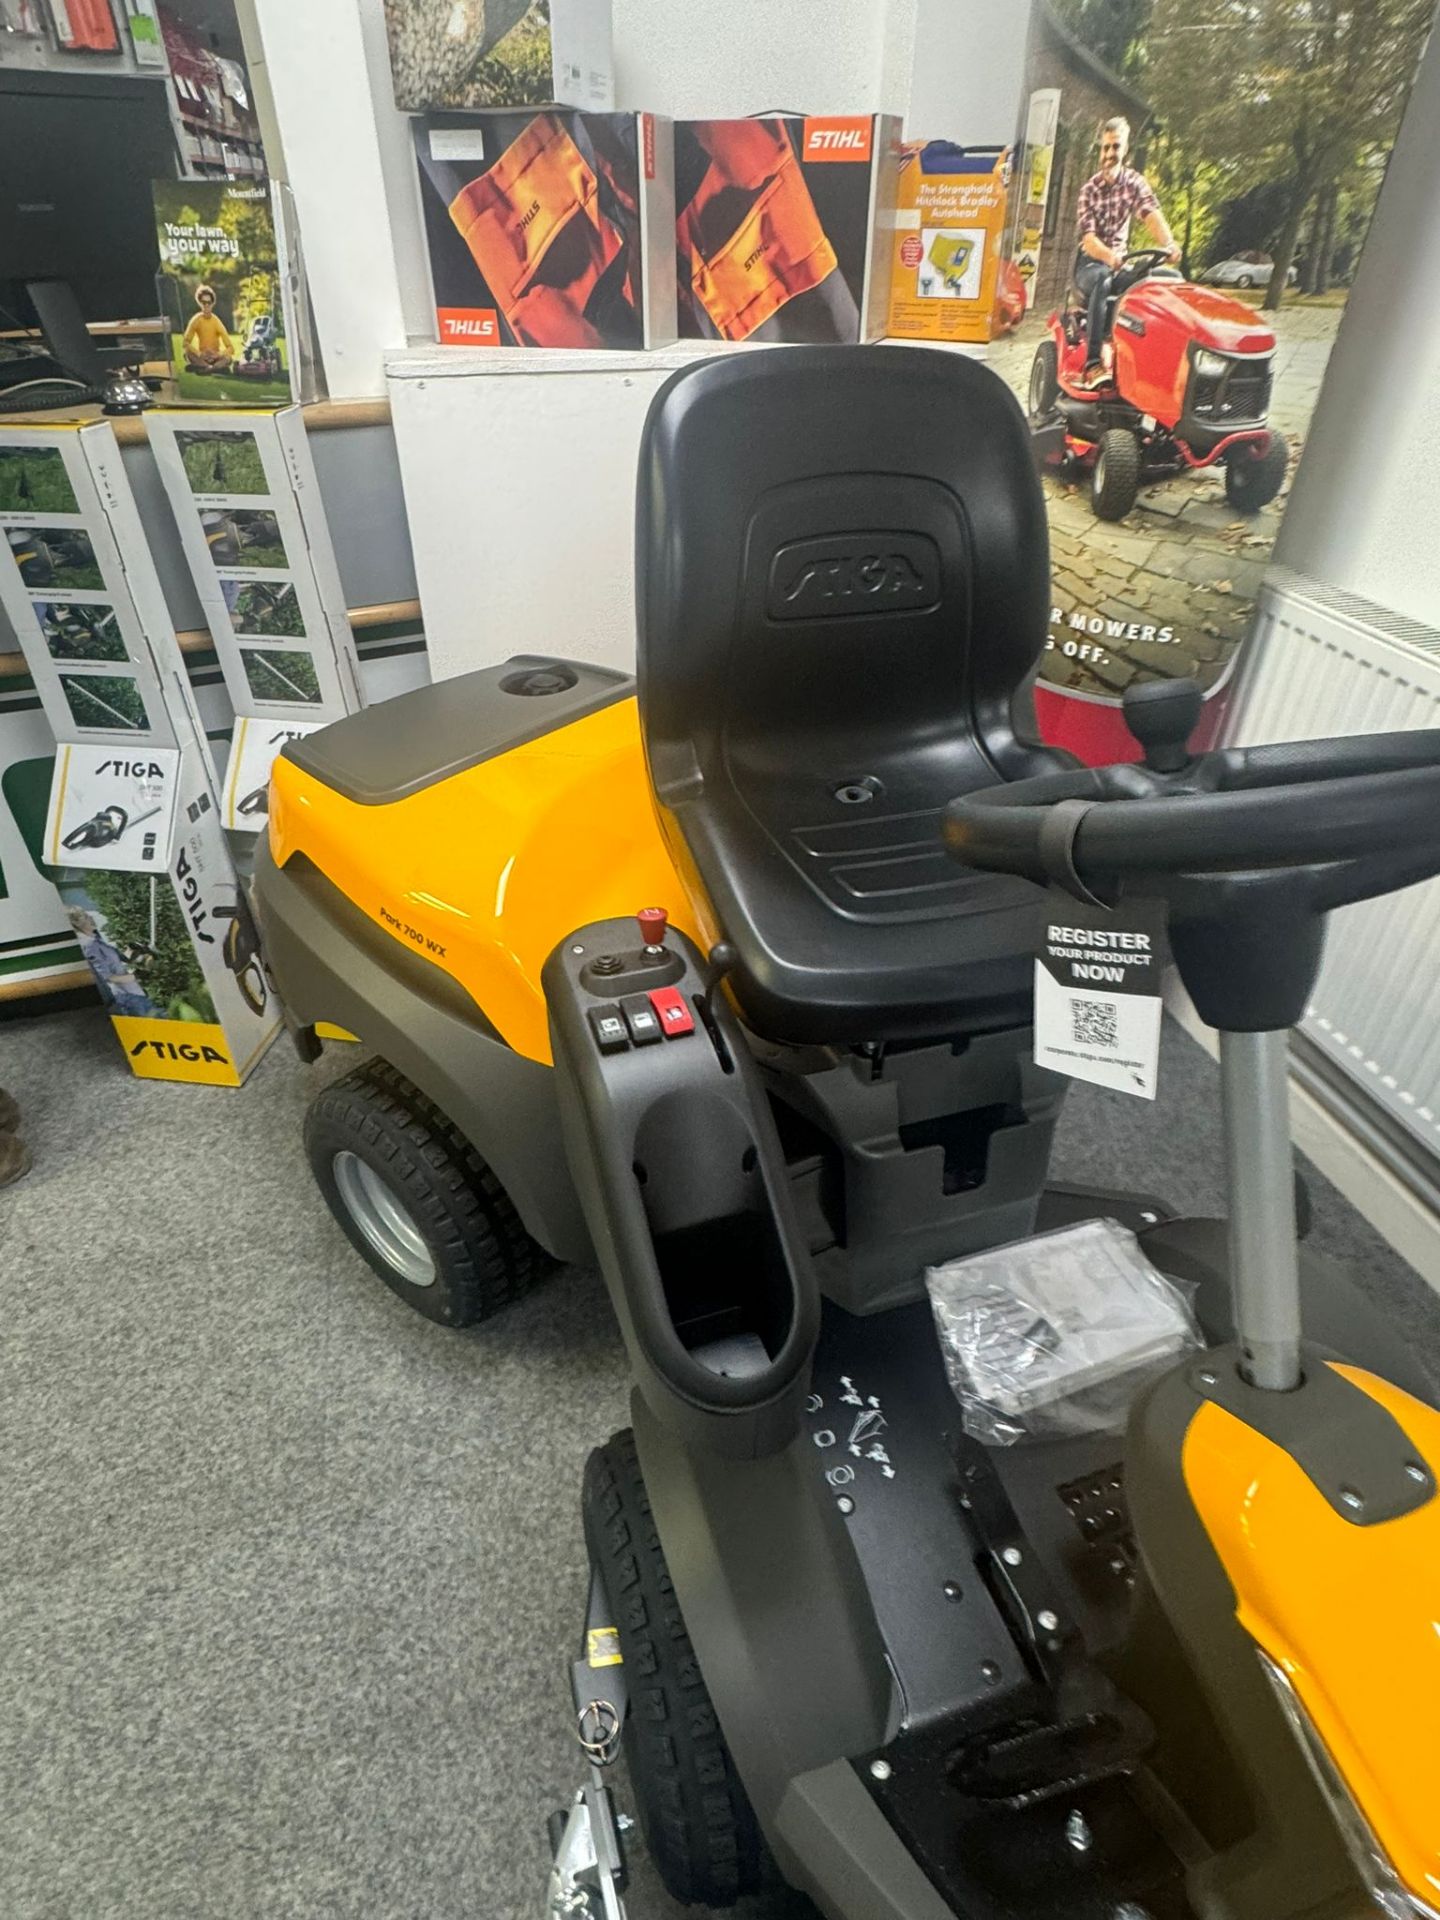 NEW/UNUSED STIGA PARK 700 WX RIDE ON LAWN MOWER 4X4 OUT FRONT *PLUS VAT* - Image 7 of 16